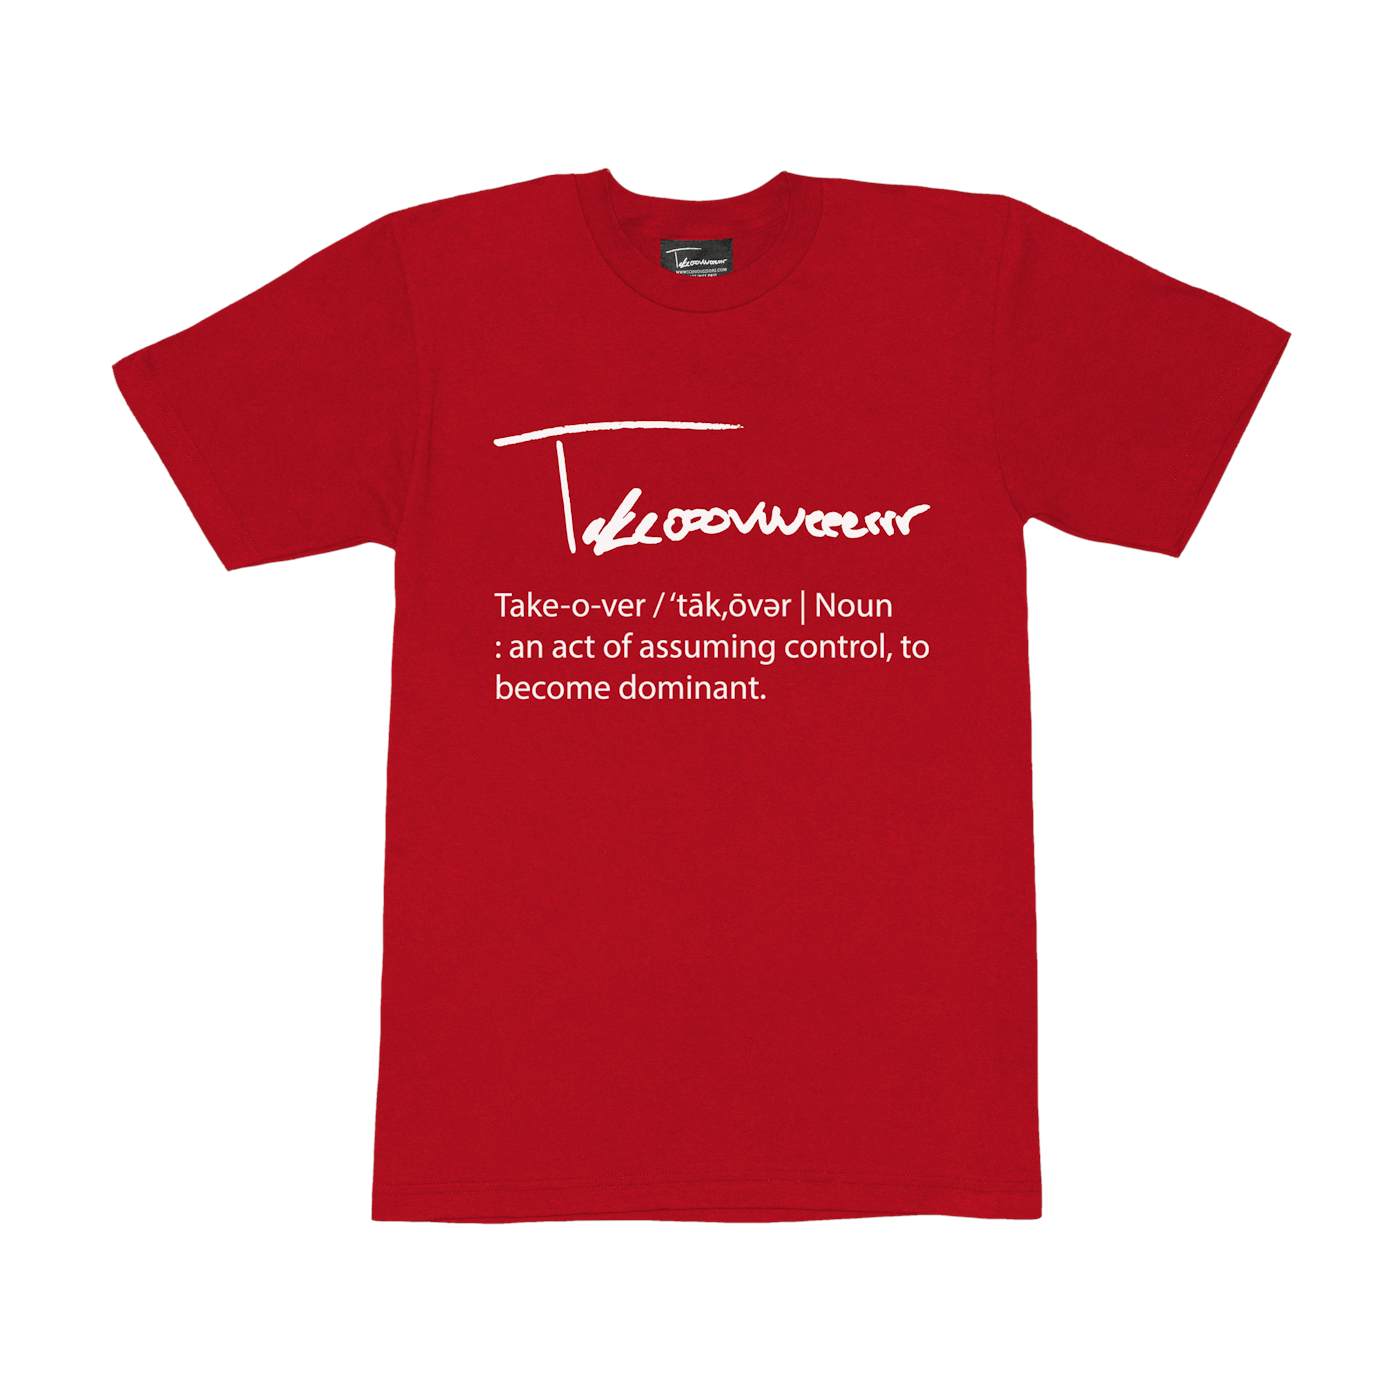 Taylor J Takeover Definition Tee (Red/White)